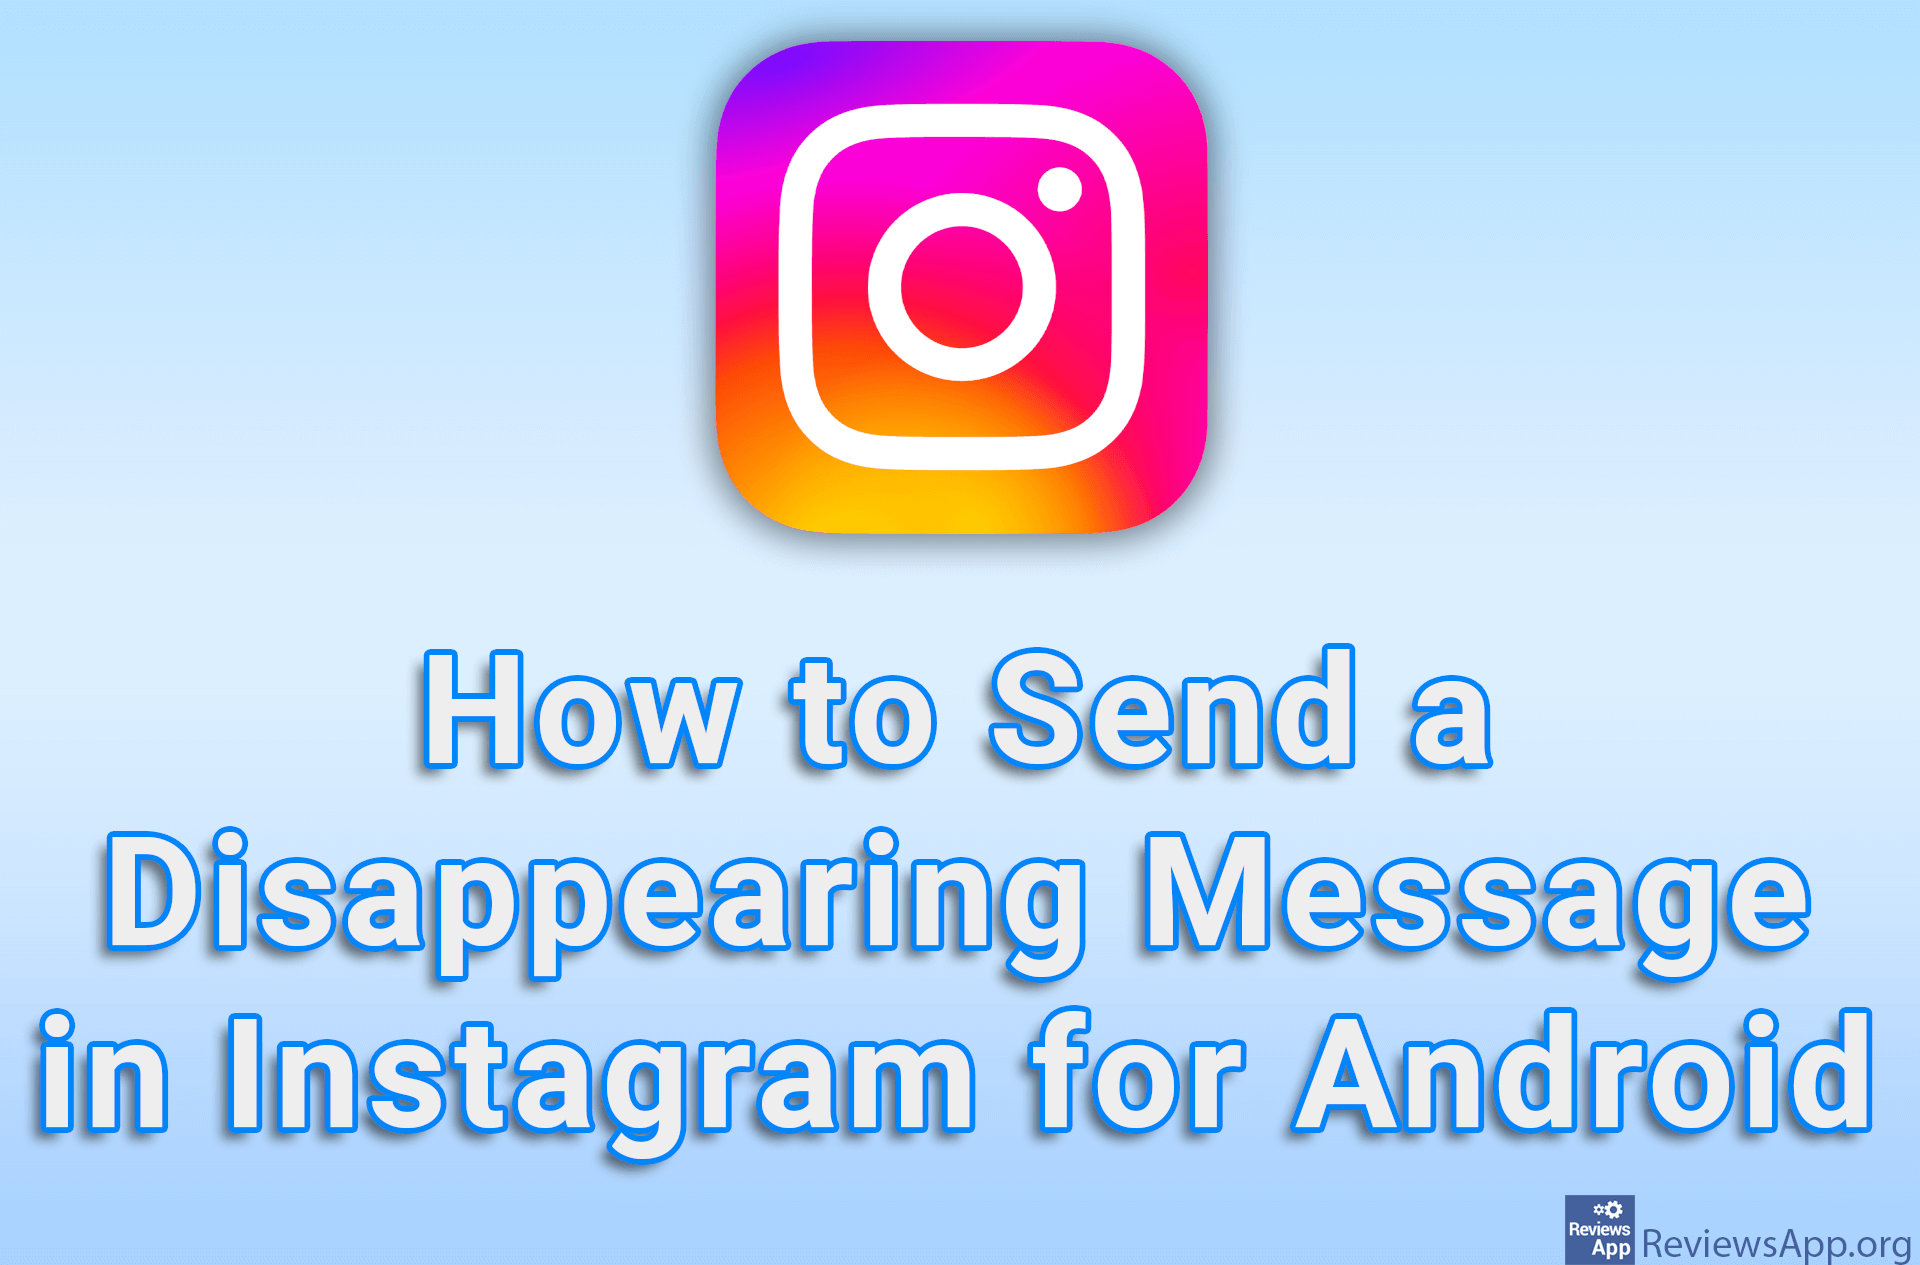 How to Send a Disappearing Message in Instagram for Android